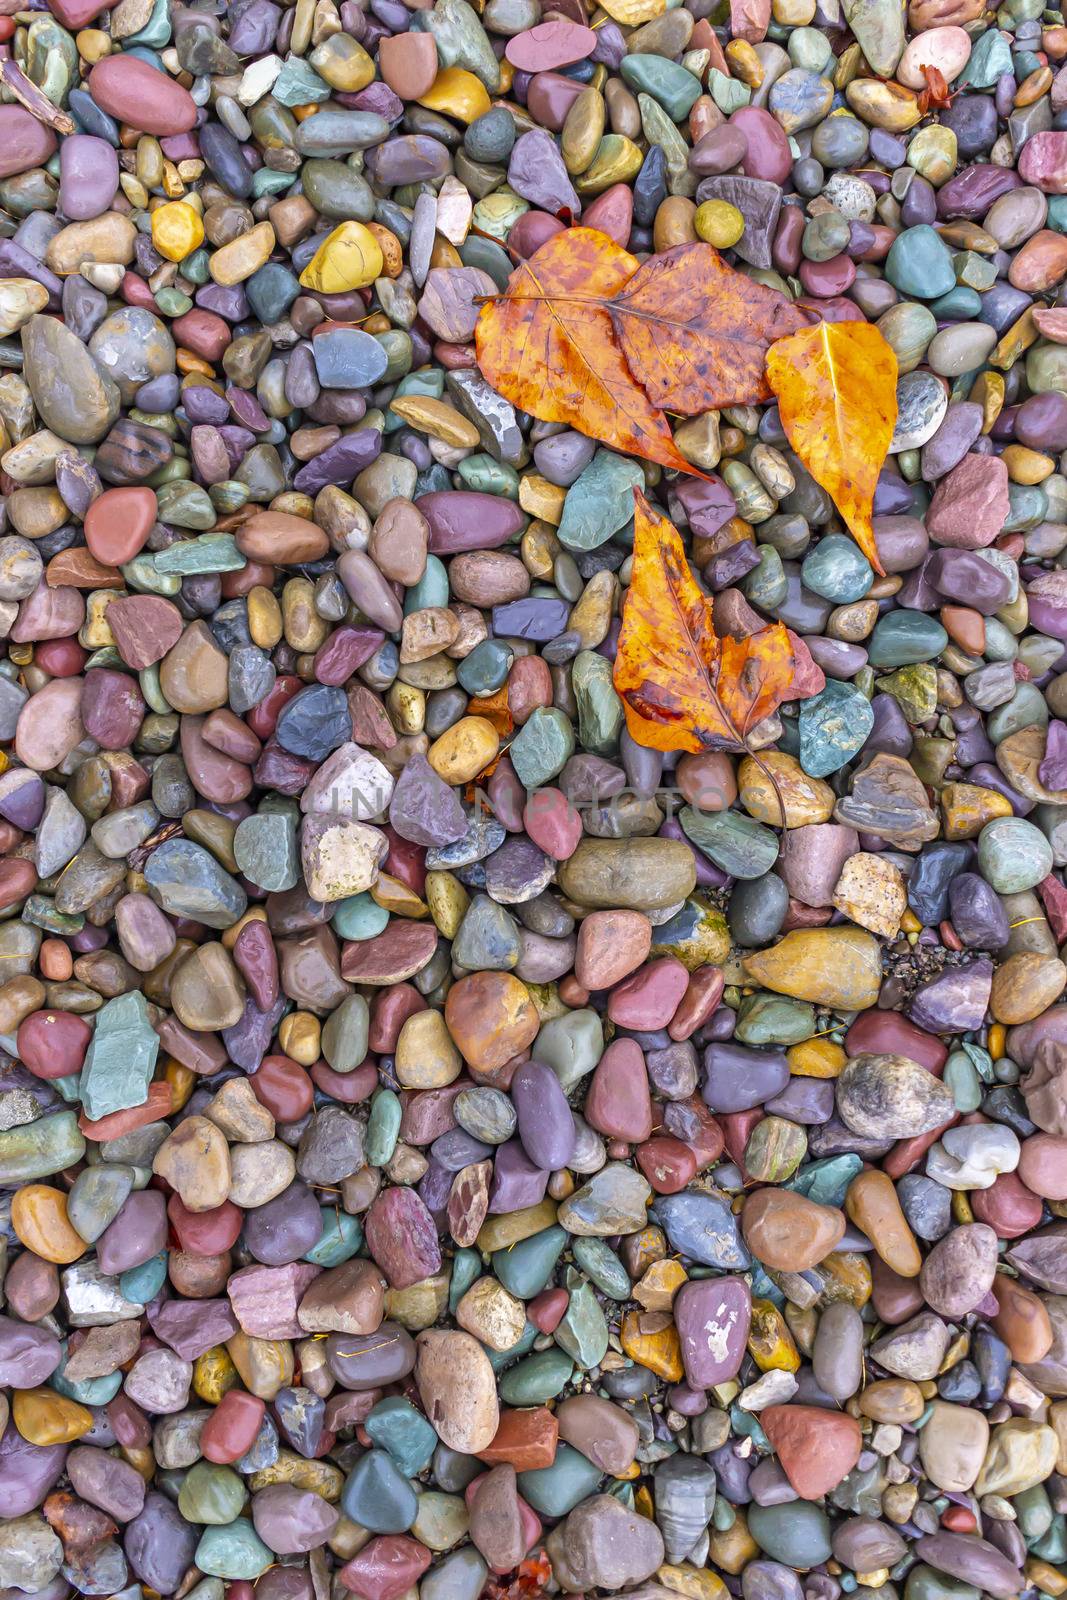 Wet Leaves Lay On Top Of Pebbles Near A Mouth Of A River by actionsports